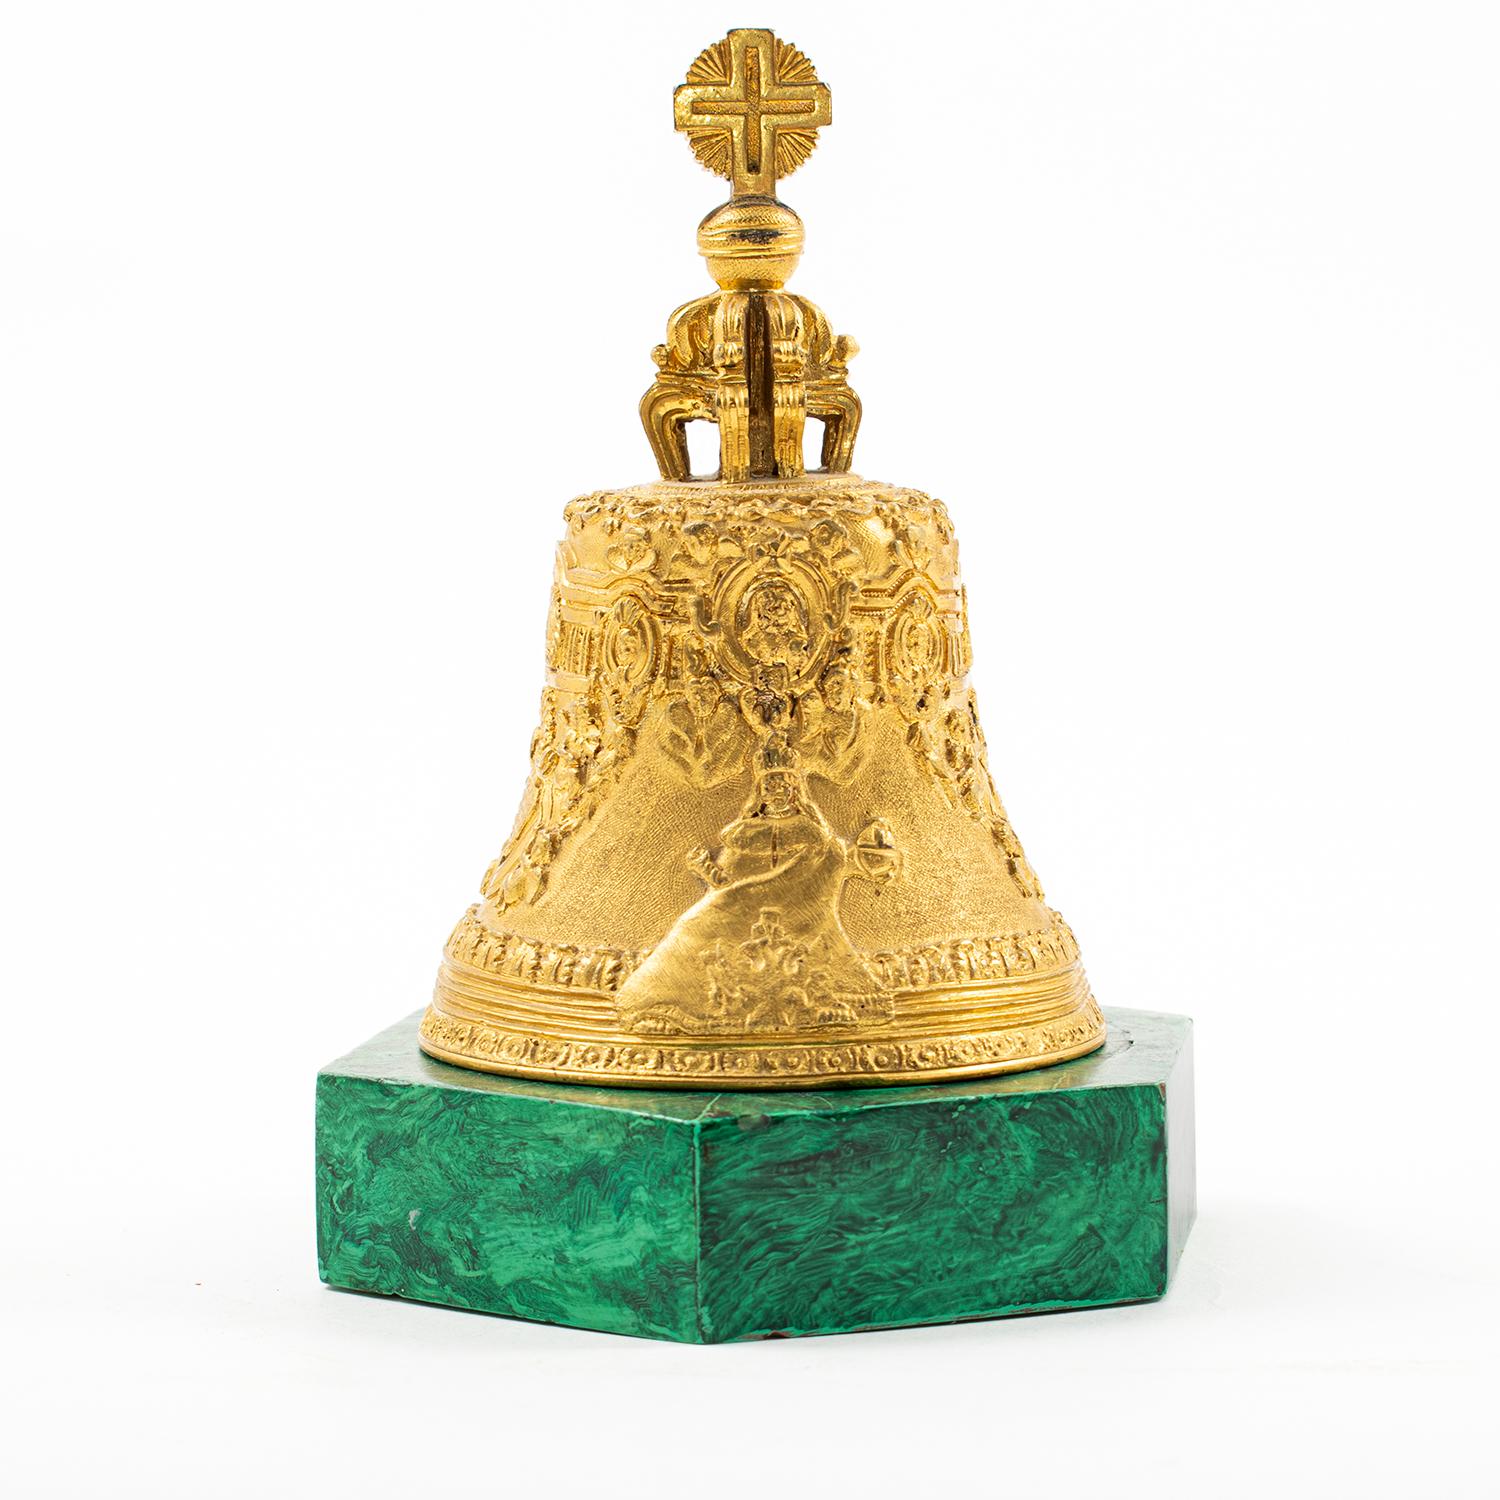 Elegant Russian bronze desk bell on a hexagonal base of malachite.
This bell is a miniature representation of the Brobdingnagian Tsar Bell in Moscow (also known as the Tsarsky Kolokol, Tsar Kolokol III, or Royal Bell).
Crafted in gilt bronze the